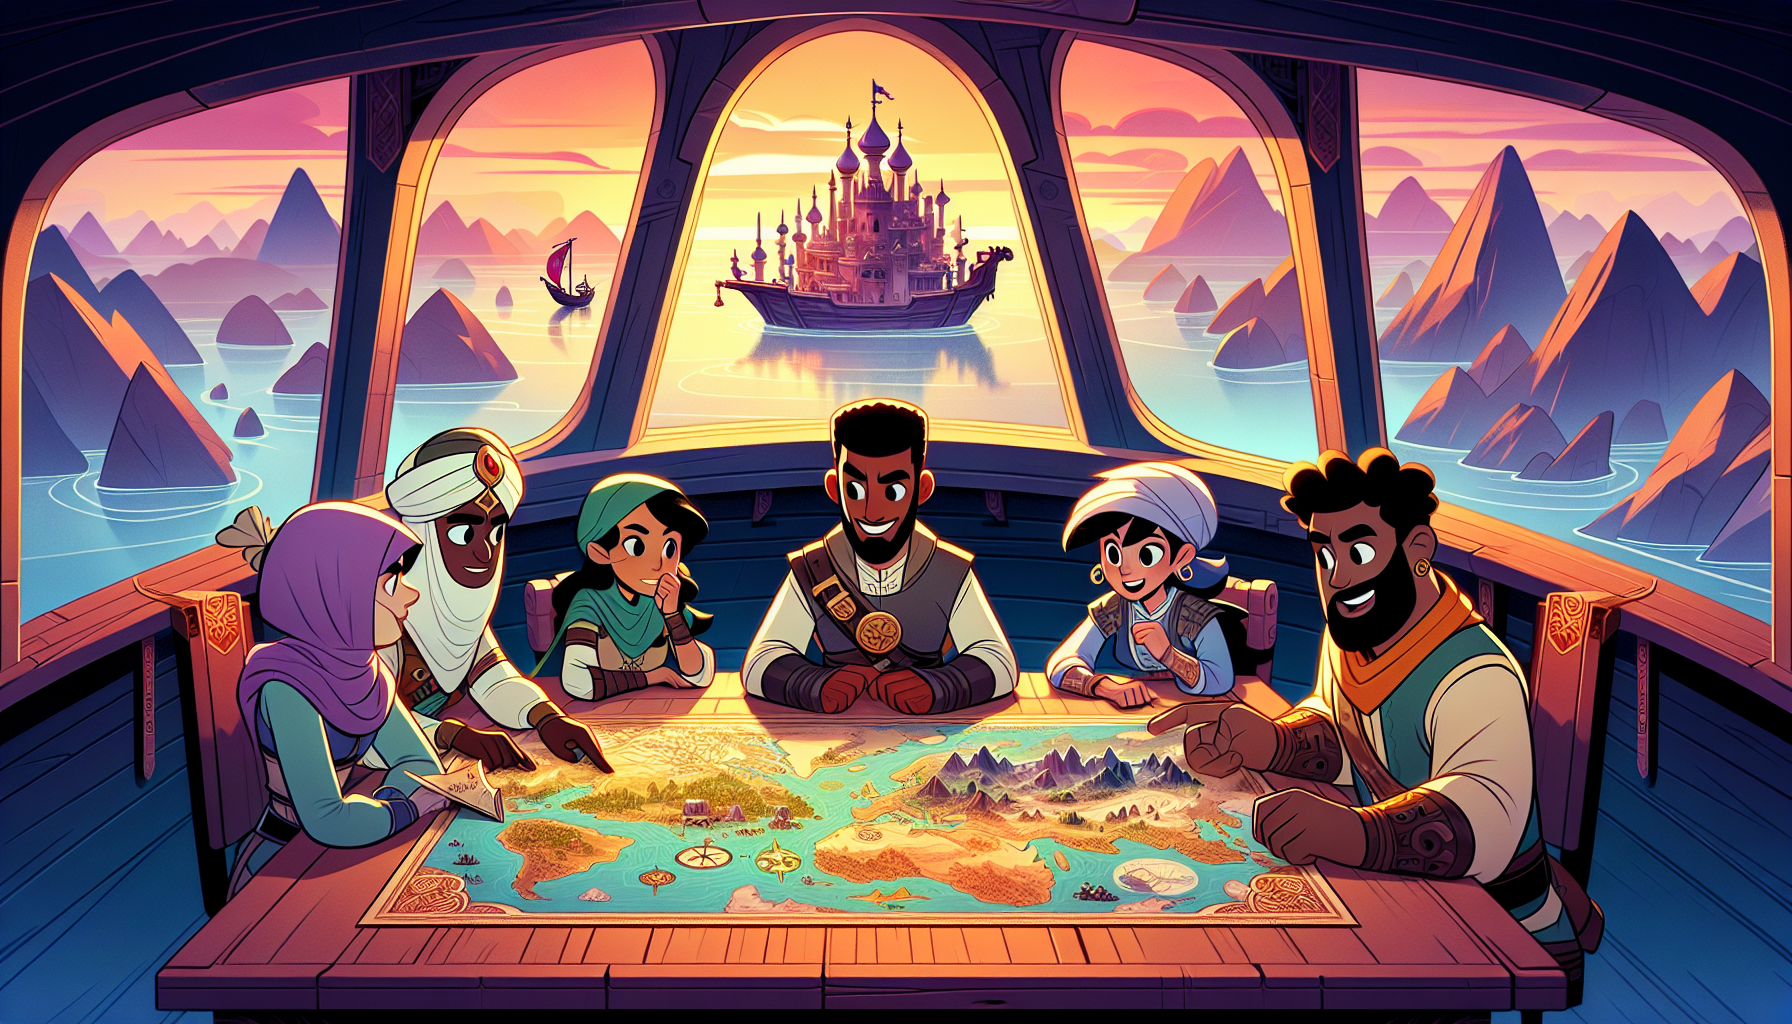 An animated scene showing a diverse group of cartoon characters, each with distinct, vibrant personalities, collaboratively plotting a map full of dangerous terrains and mystical landmarks on a grand